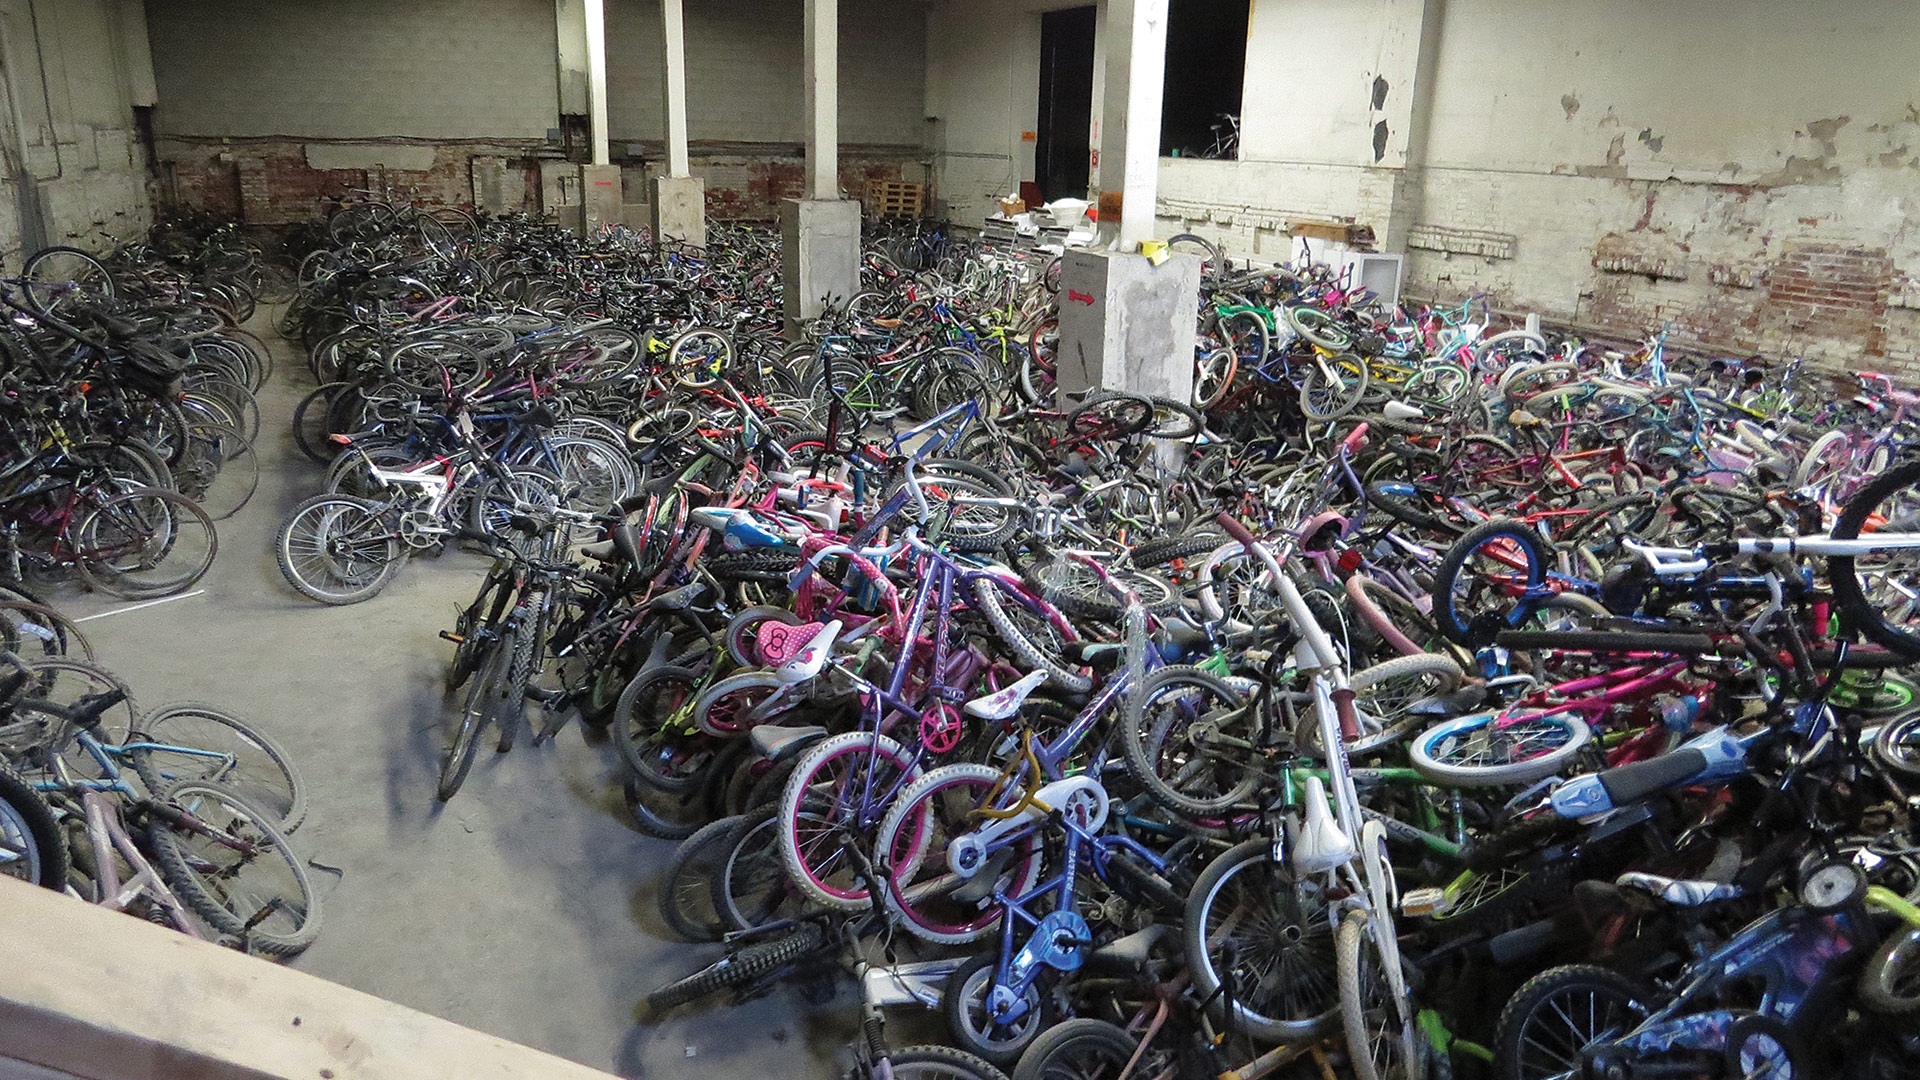 Just some of the thousands of bikes waiting to be repaired and prepared for delivery to children